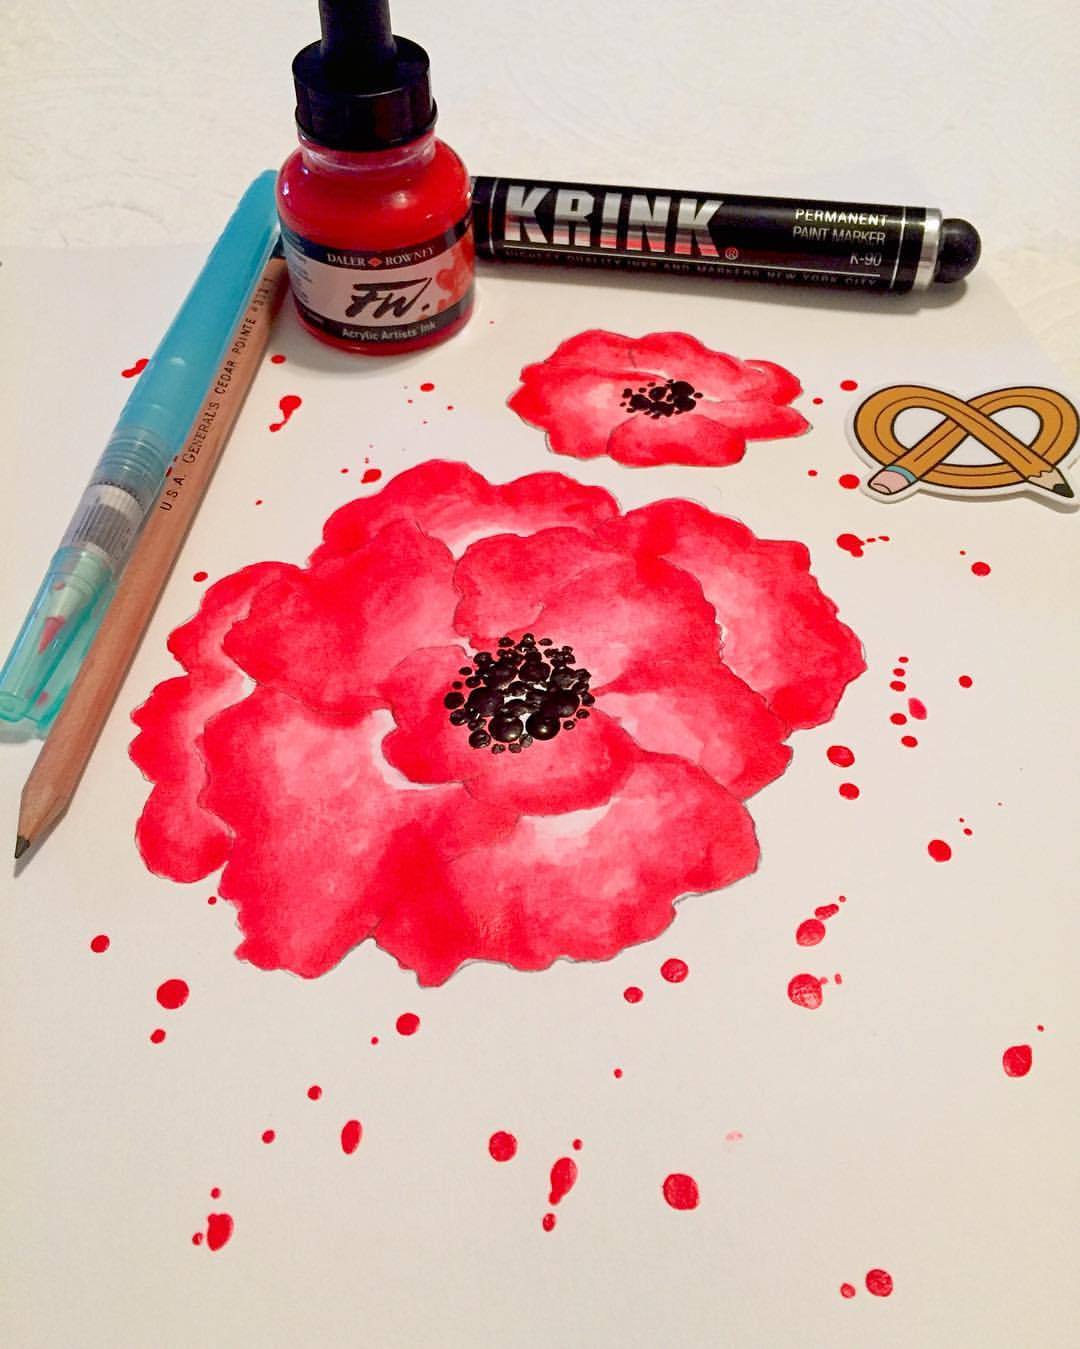 thedear-monster: “I finally got around to playing with my May @artsnacks #poppies #flourescentred #krink #kuretake #generals #artsnackschallenge #may #drawing #art #paint ” ArtSnacks is like a magazine subscription but instead of a magazine you get a...